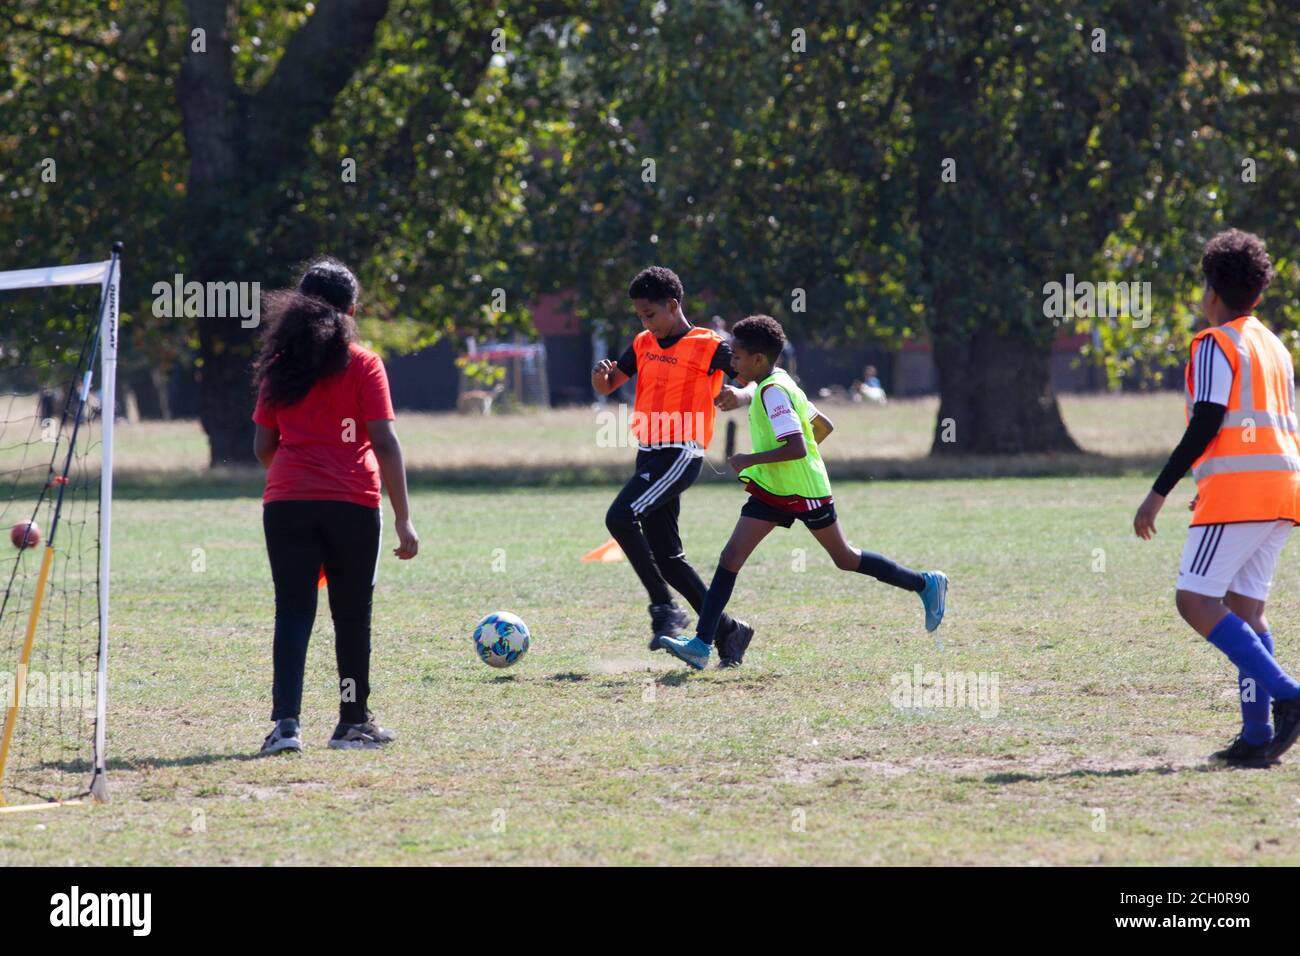 London, UK. 13 Sept 2020: Children took advantage of sunny weather to play football on Clapham Common, London. New laws effective from tomorrow will ban groups of over 6 people meeting but organised sports are exempt from the rule. Anna Watson/Alamy Live News Stock Photo